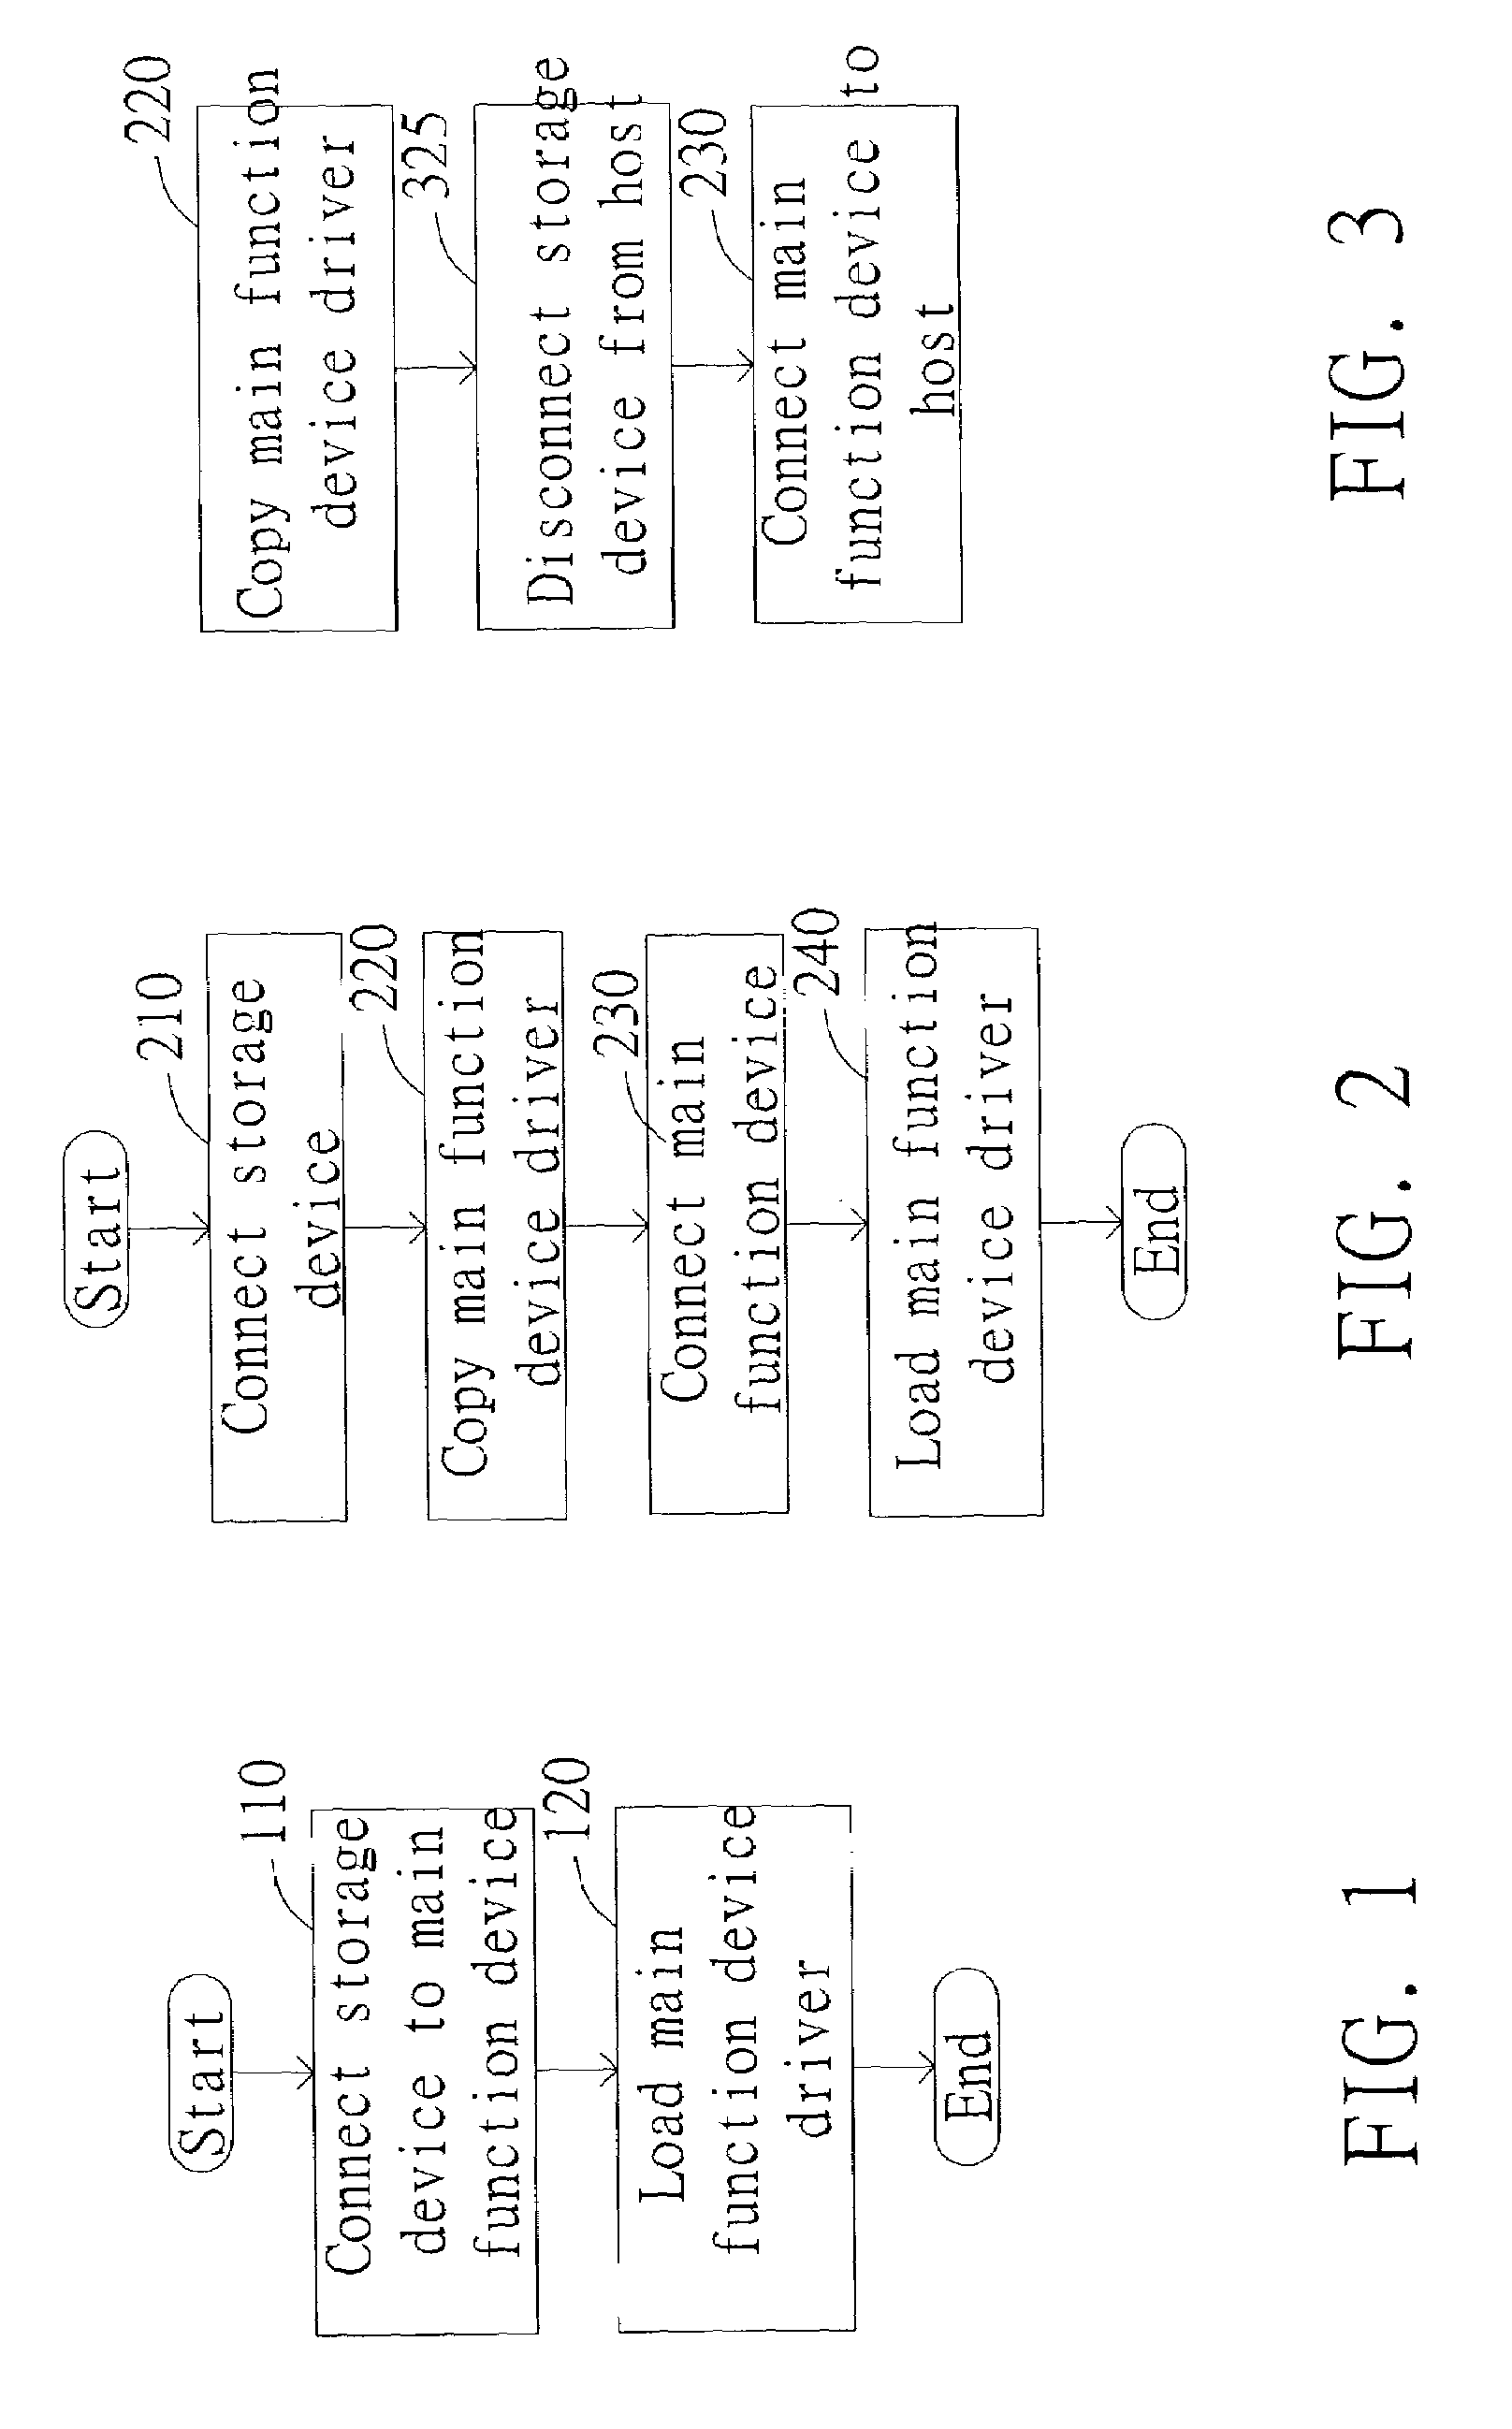 Method of installing a plug and play device driver